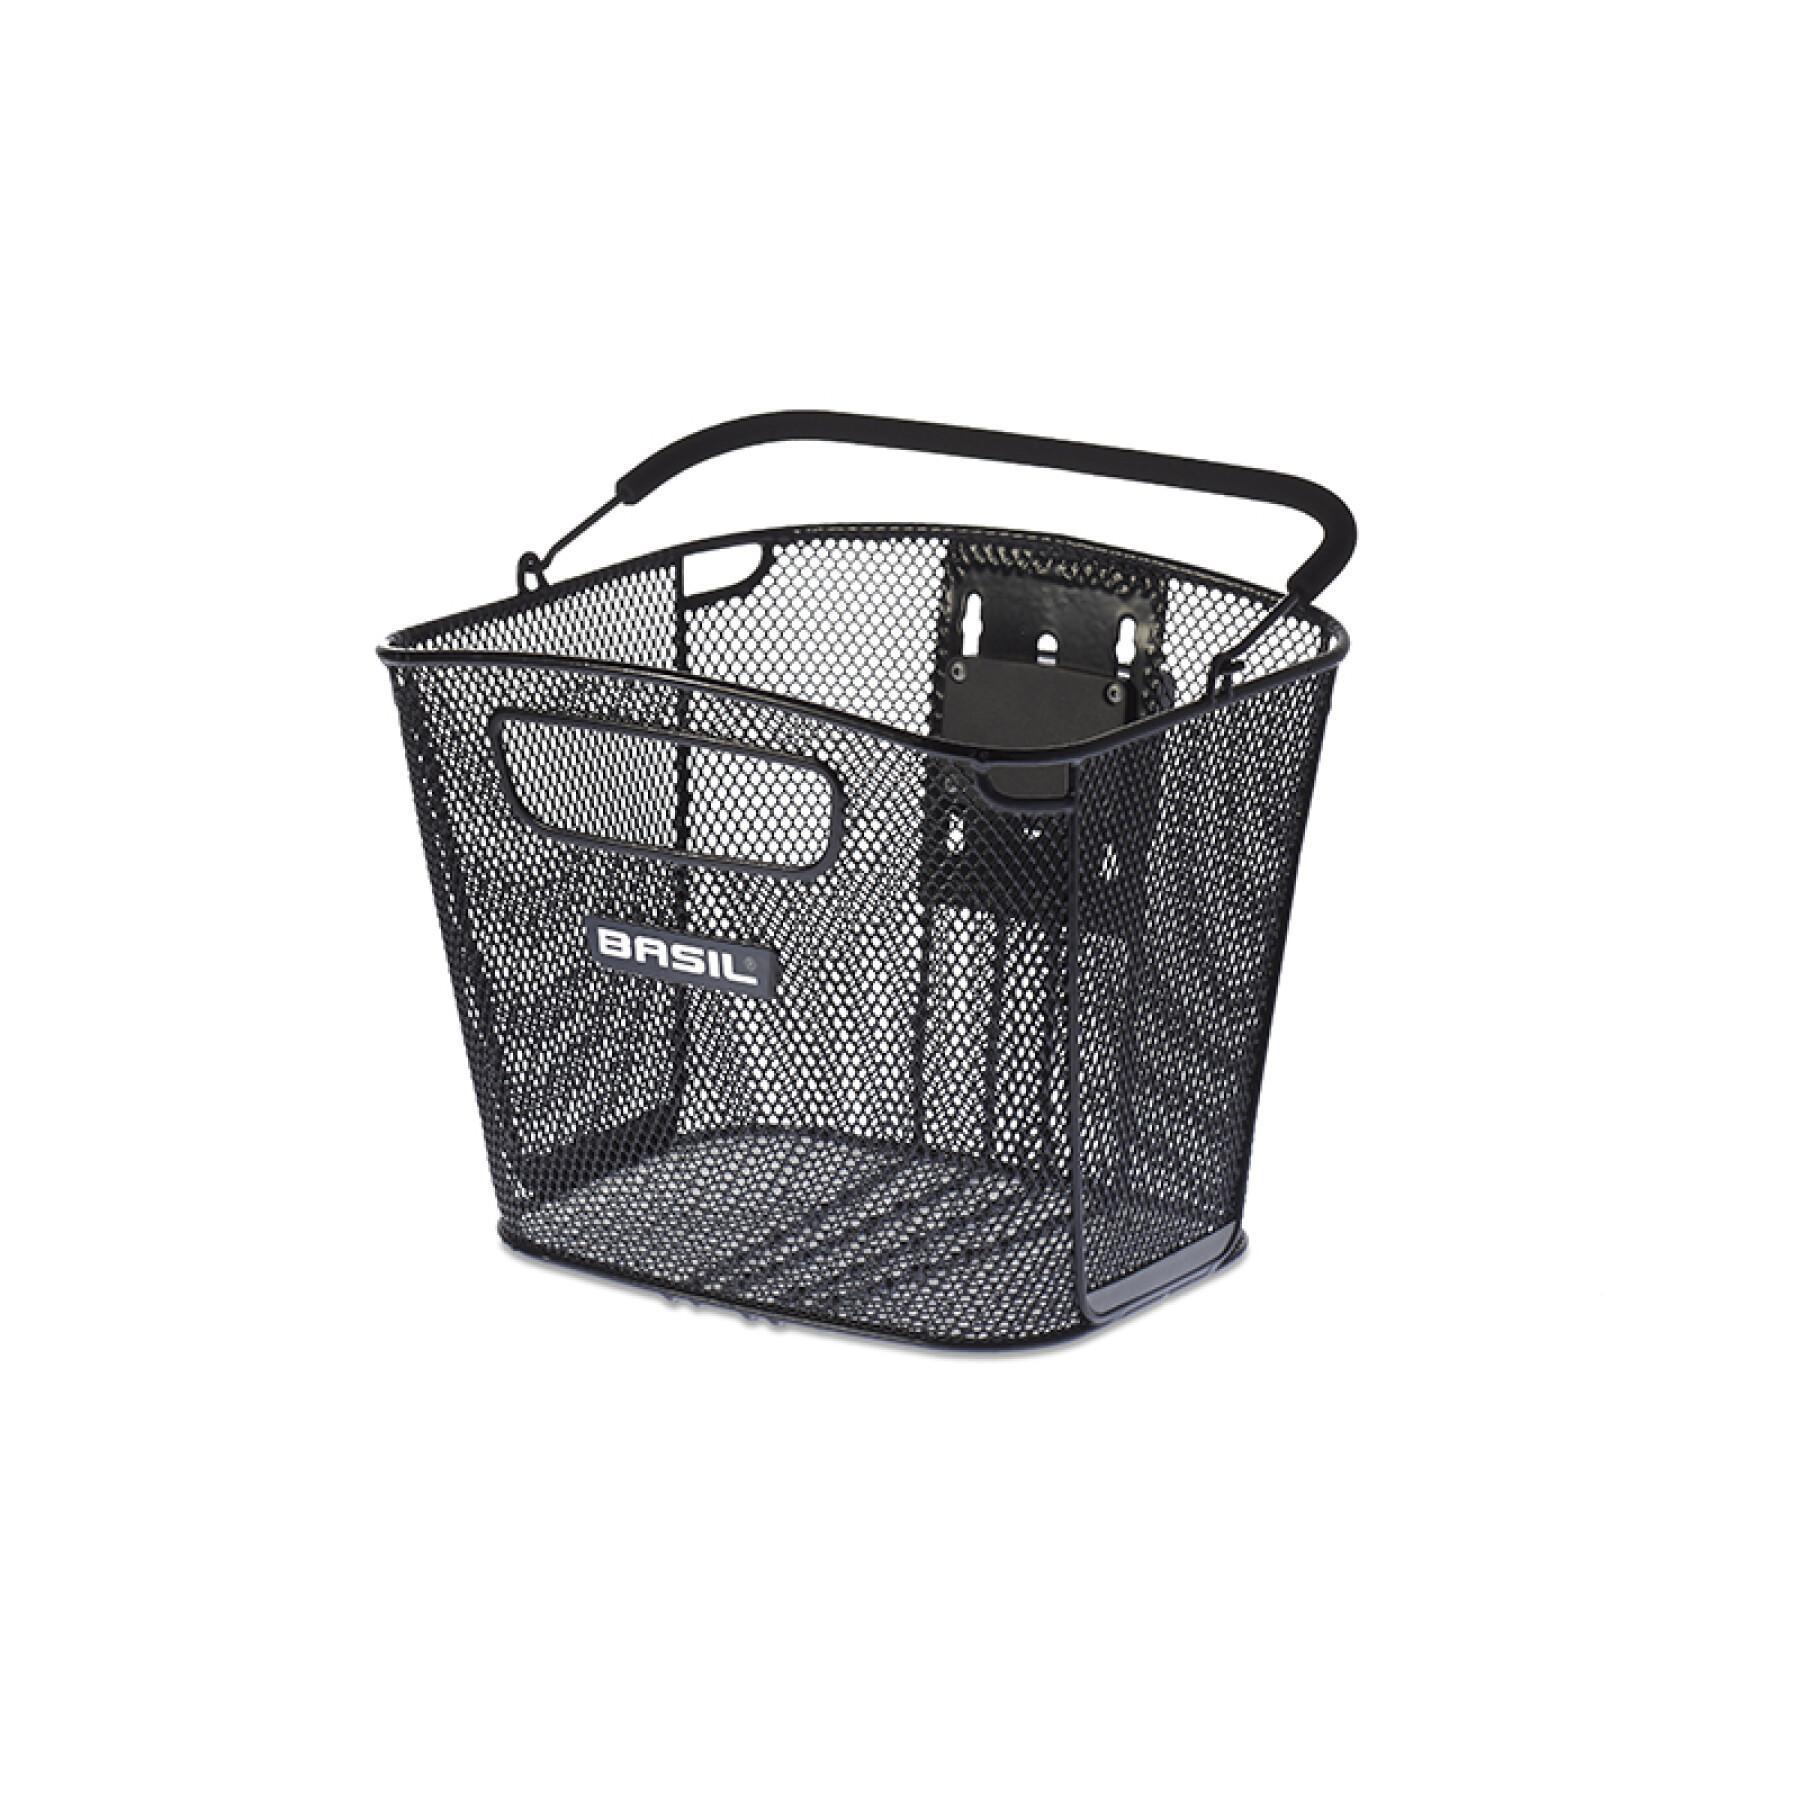 Bicycle basket with handle Basil front - - Bold + adapter kf steel Equipments Luggage